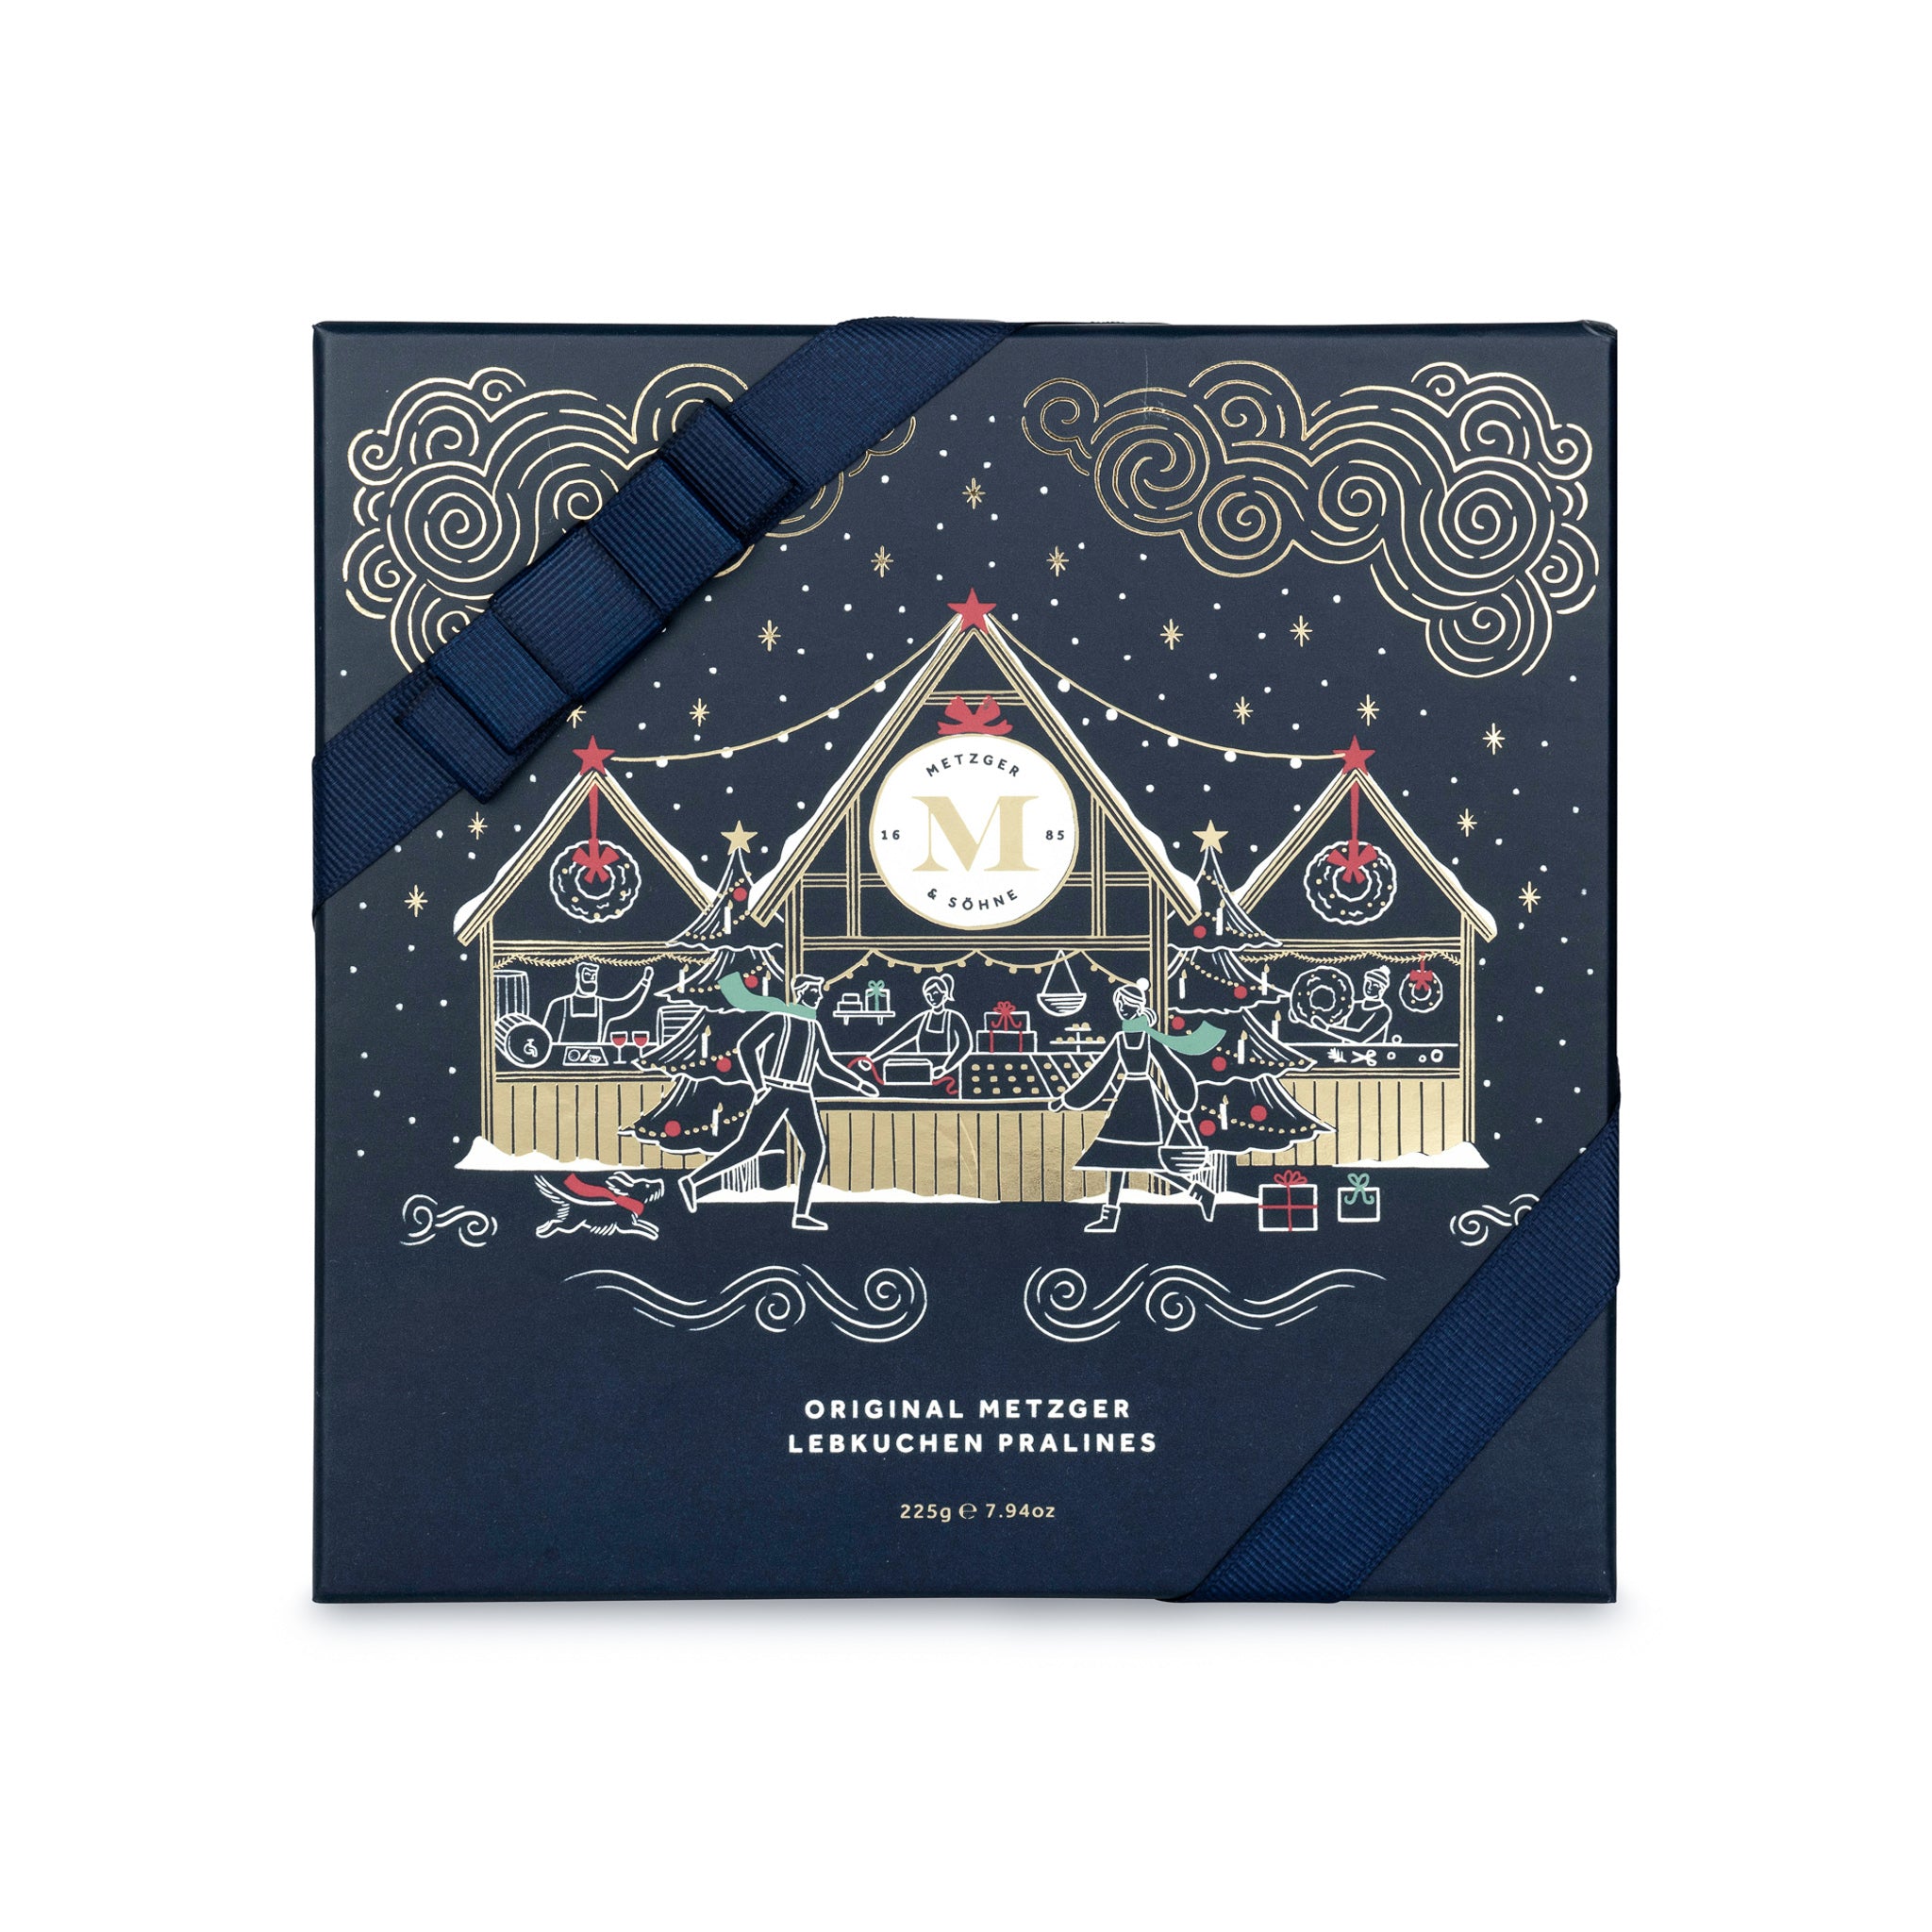 Exclusive Christmas Lebkuchen 'Honey cake' praline box in navy blue with magical gold foil print, filled with 16 exquisite Lebkuchen pralines: marzipan, fruit jam or jelly and nutty flavours.